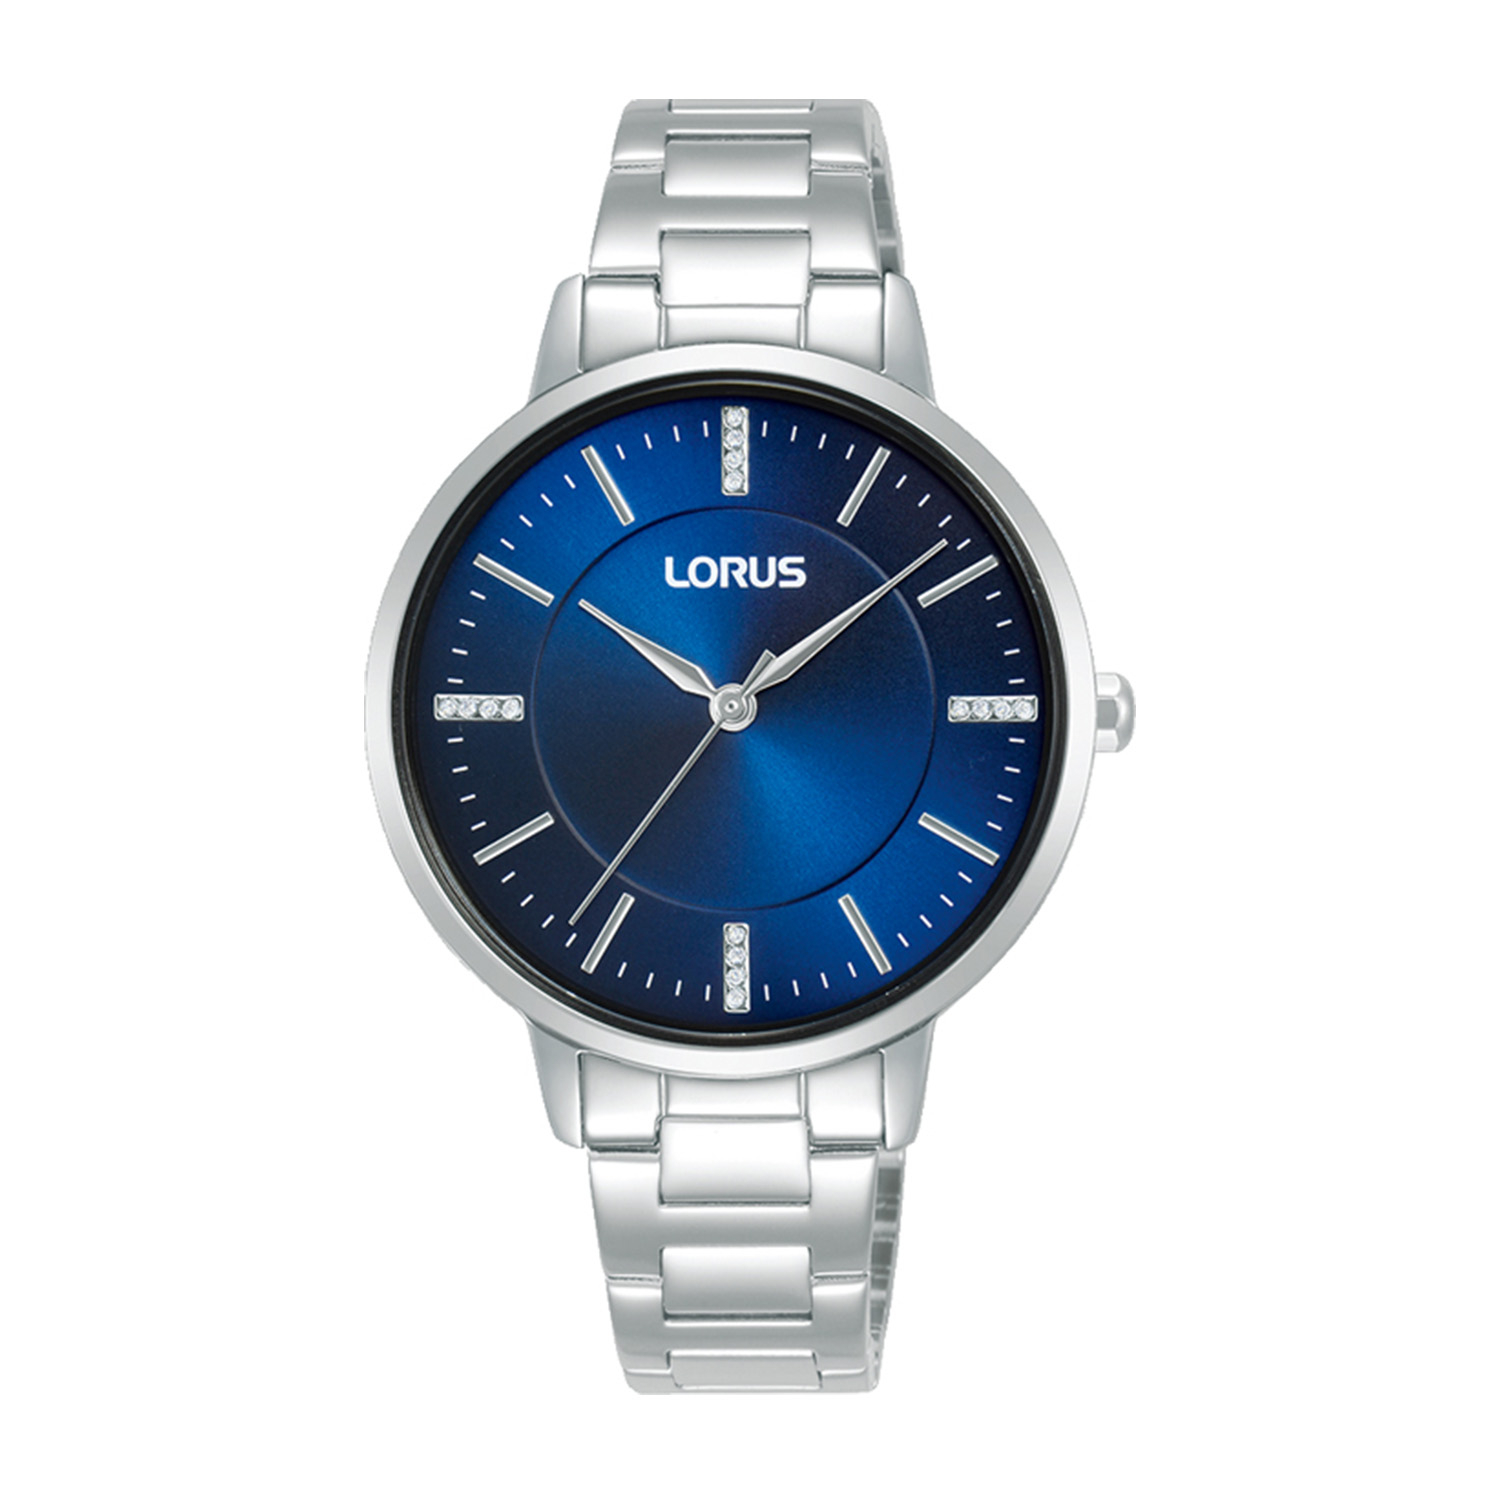 Womens watch LORUS made of silver stainless steel with blue dial and bracelet.